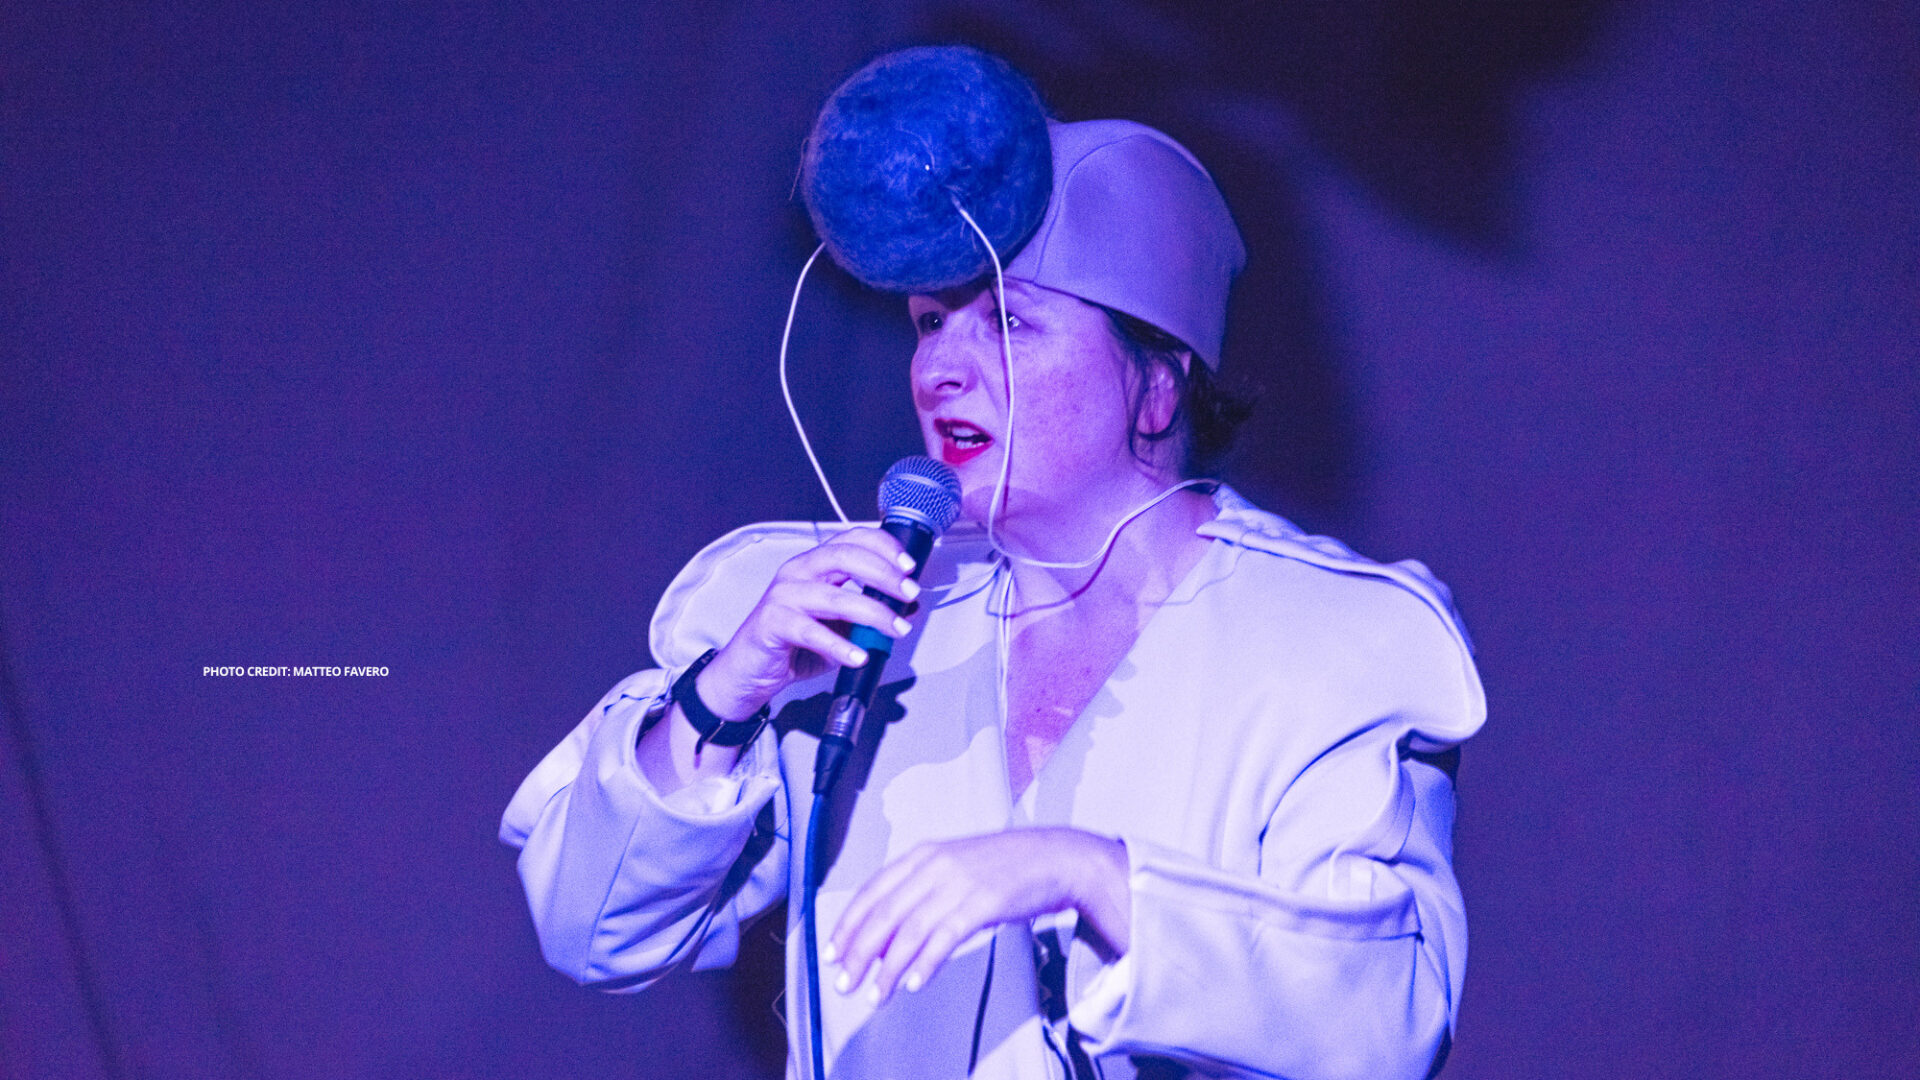 Image of Nicola Woodham during their performance of Buffer at Cafe Oto. Nicola is wearing a custom made white soundsuit and holding a microphone.